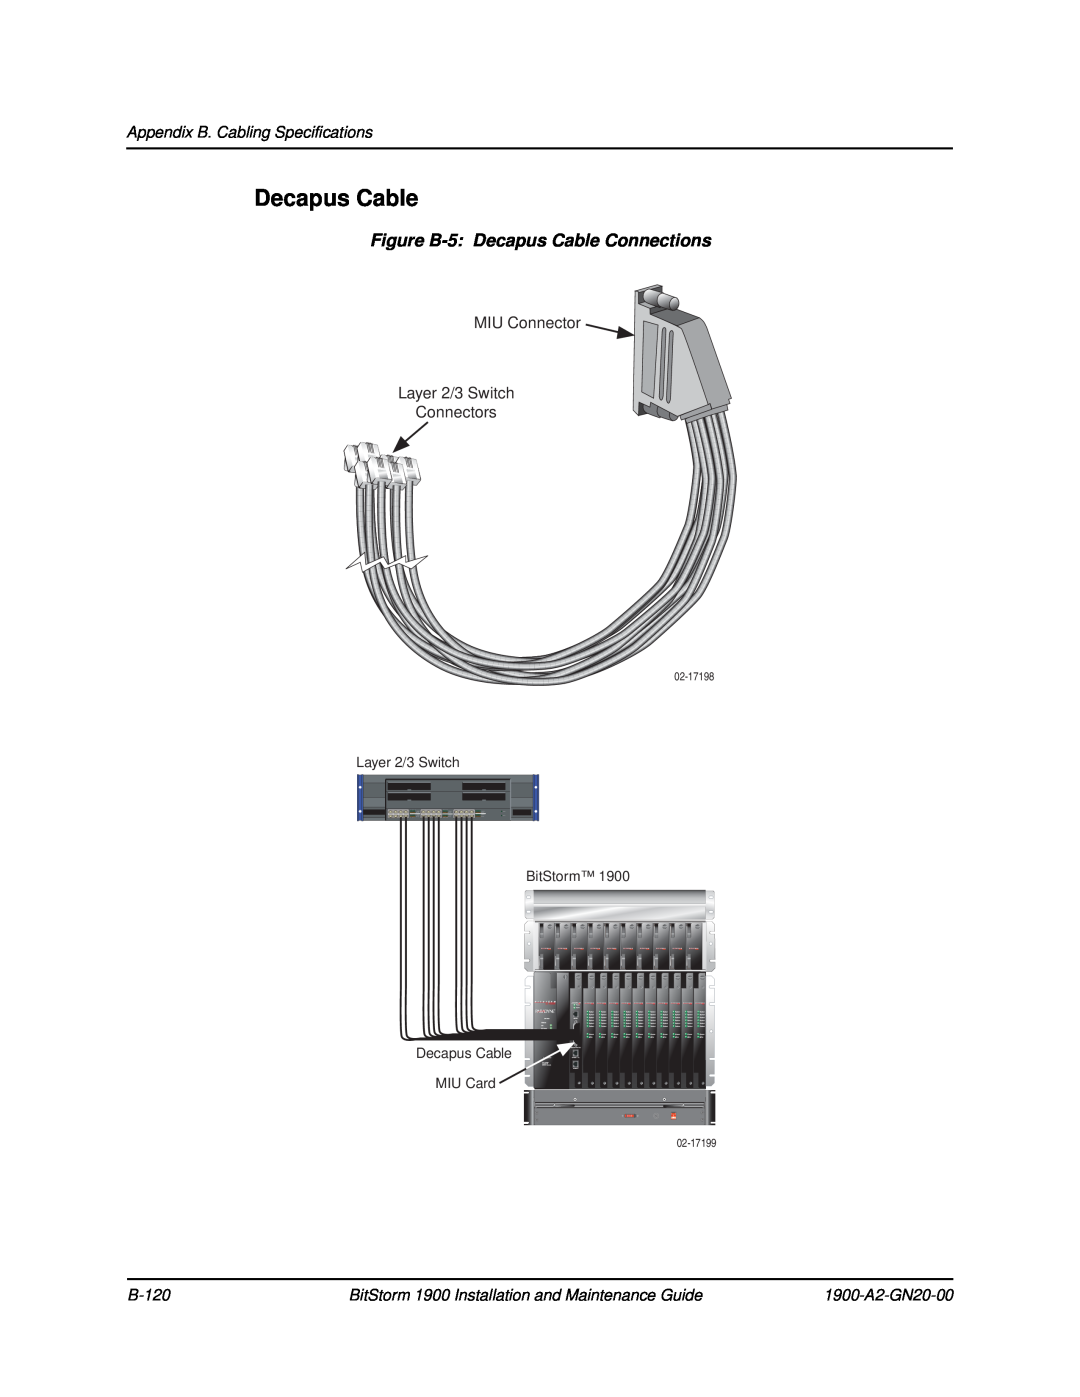 Paradyne manual Figure B-5 Decapus Cable Connections, Appendix B. Cabling Specifications, B-120, 1900-A2-GN20-00 